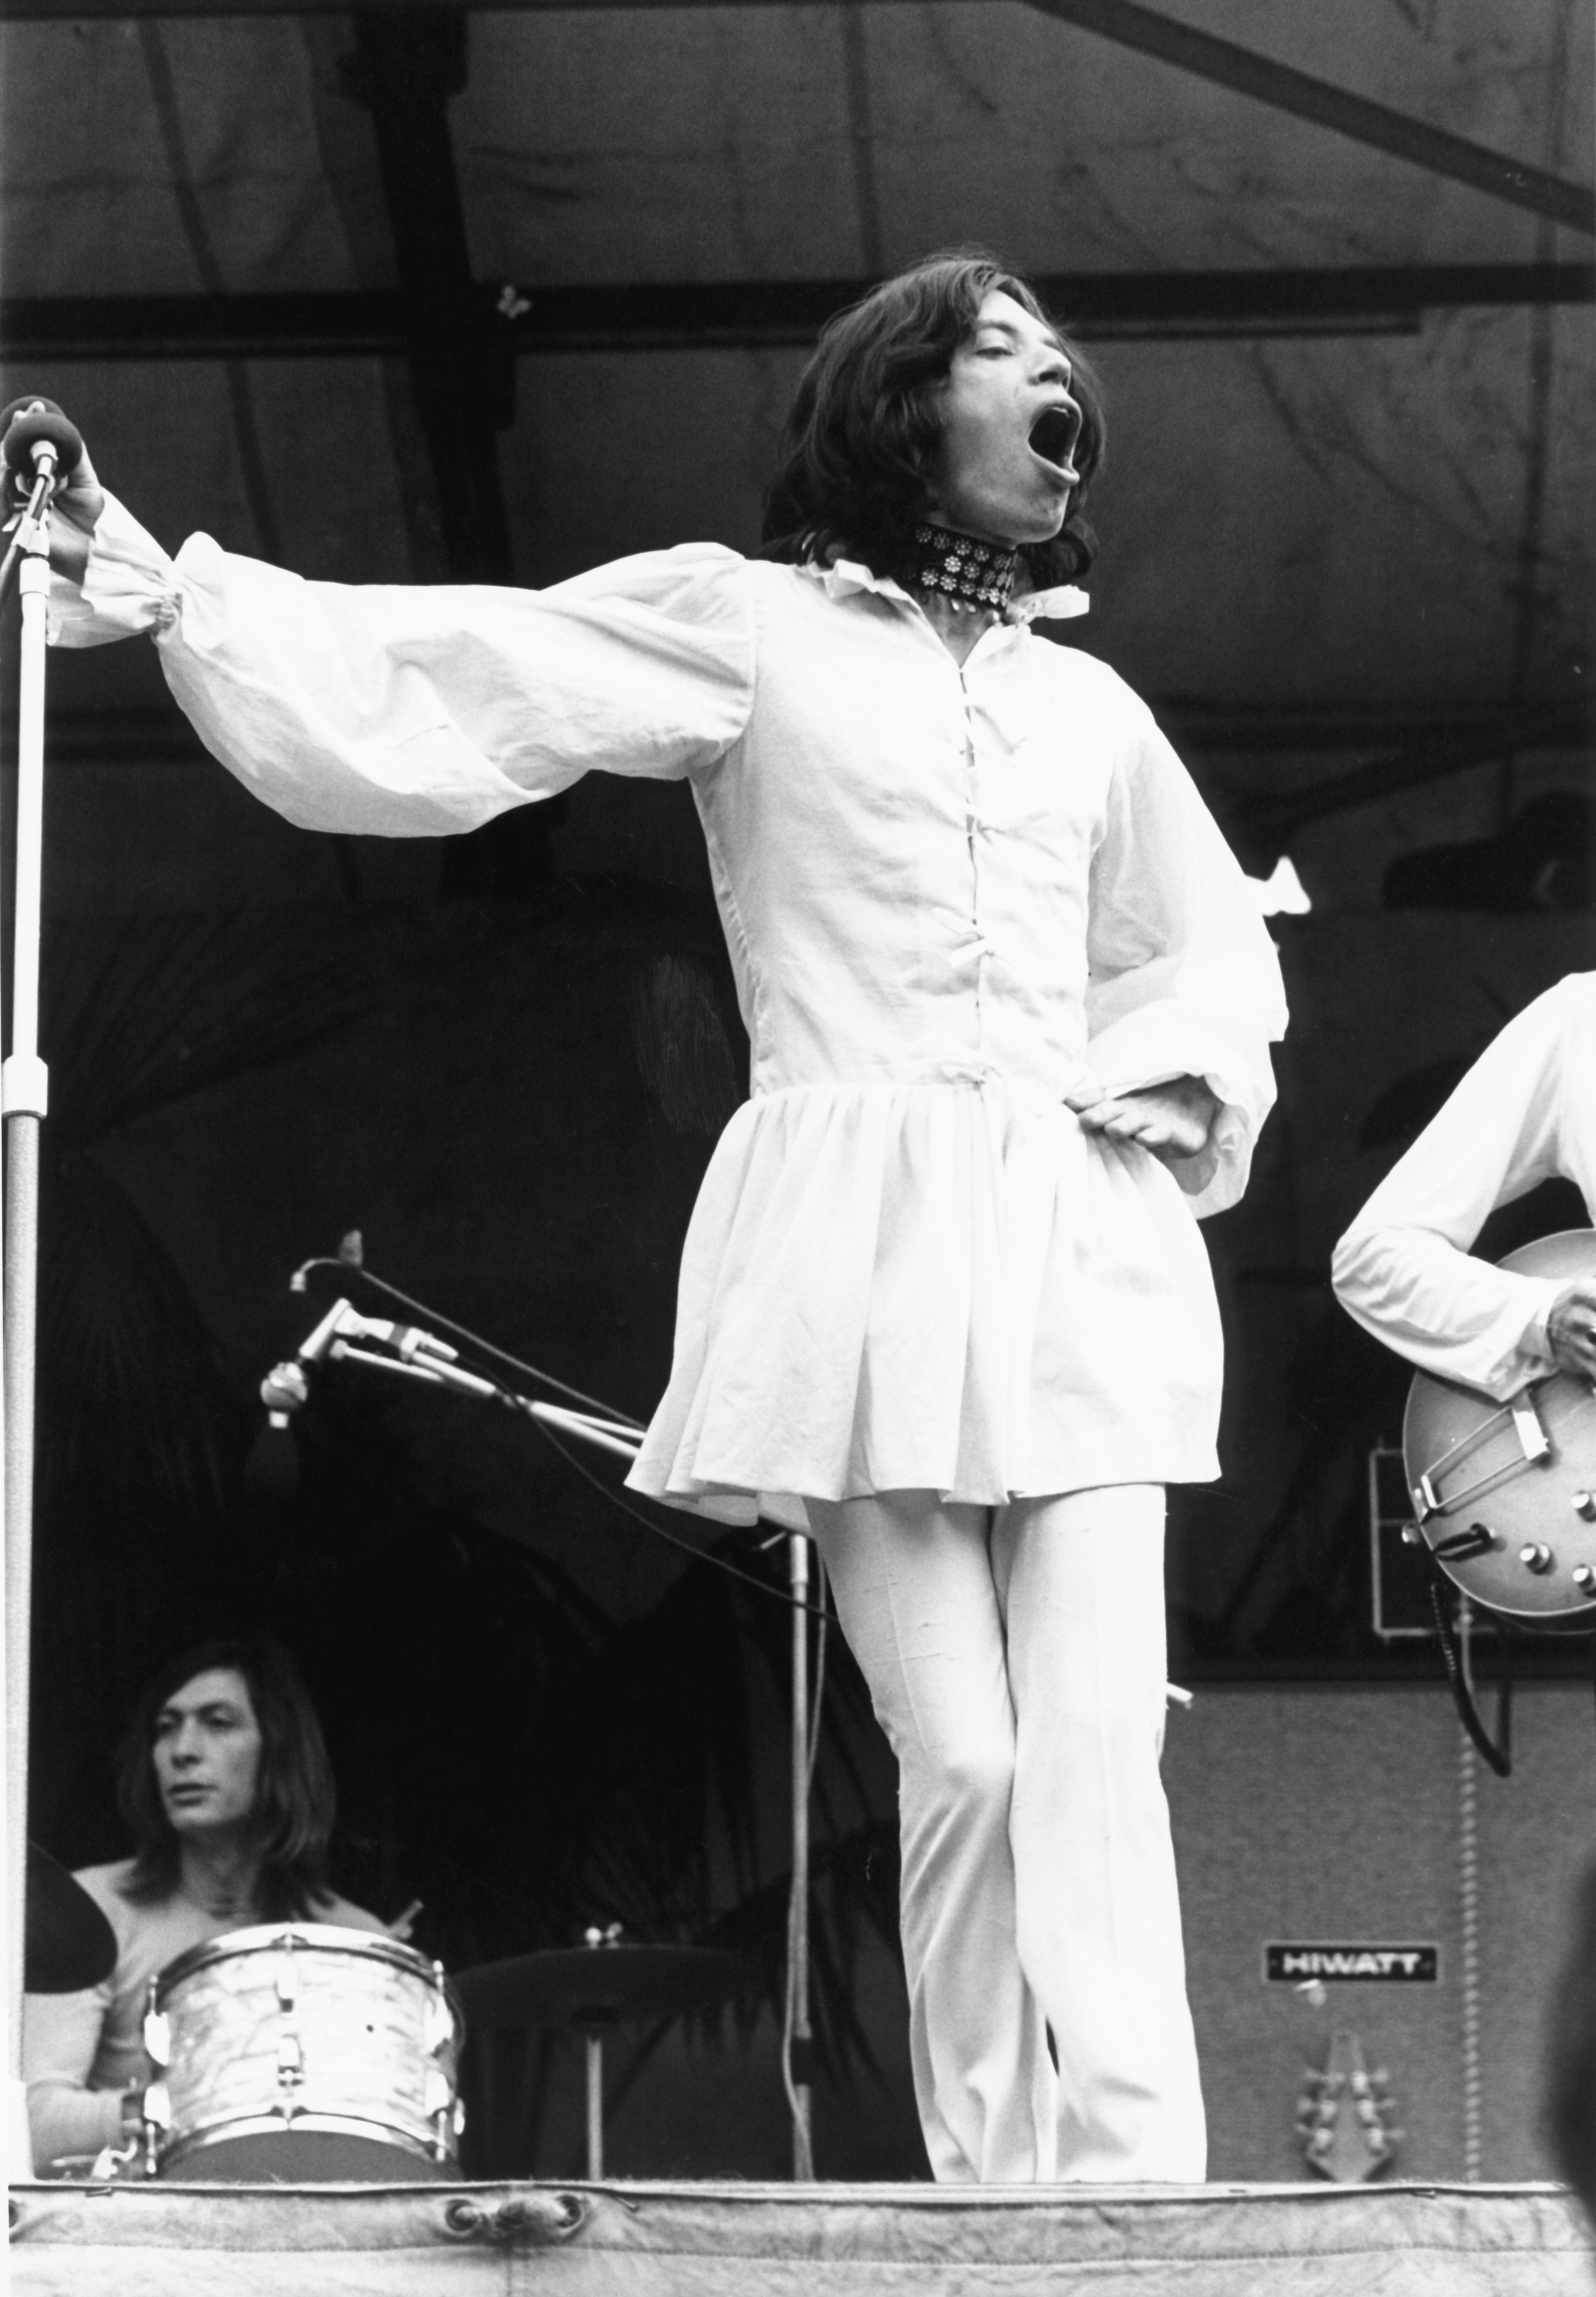 mick jagger singing on-stage at the stones in the park concert 1969